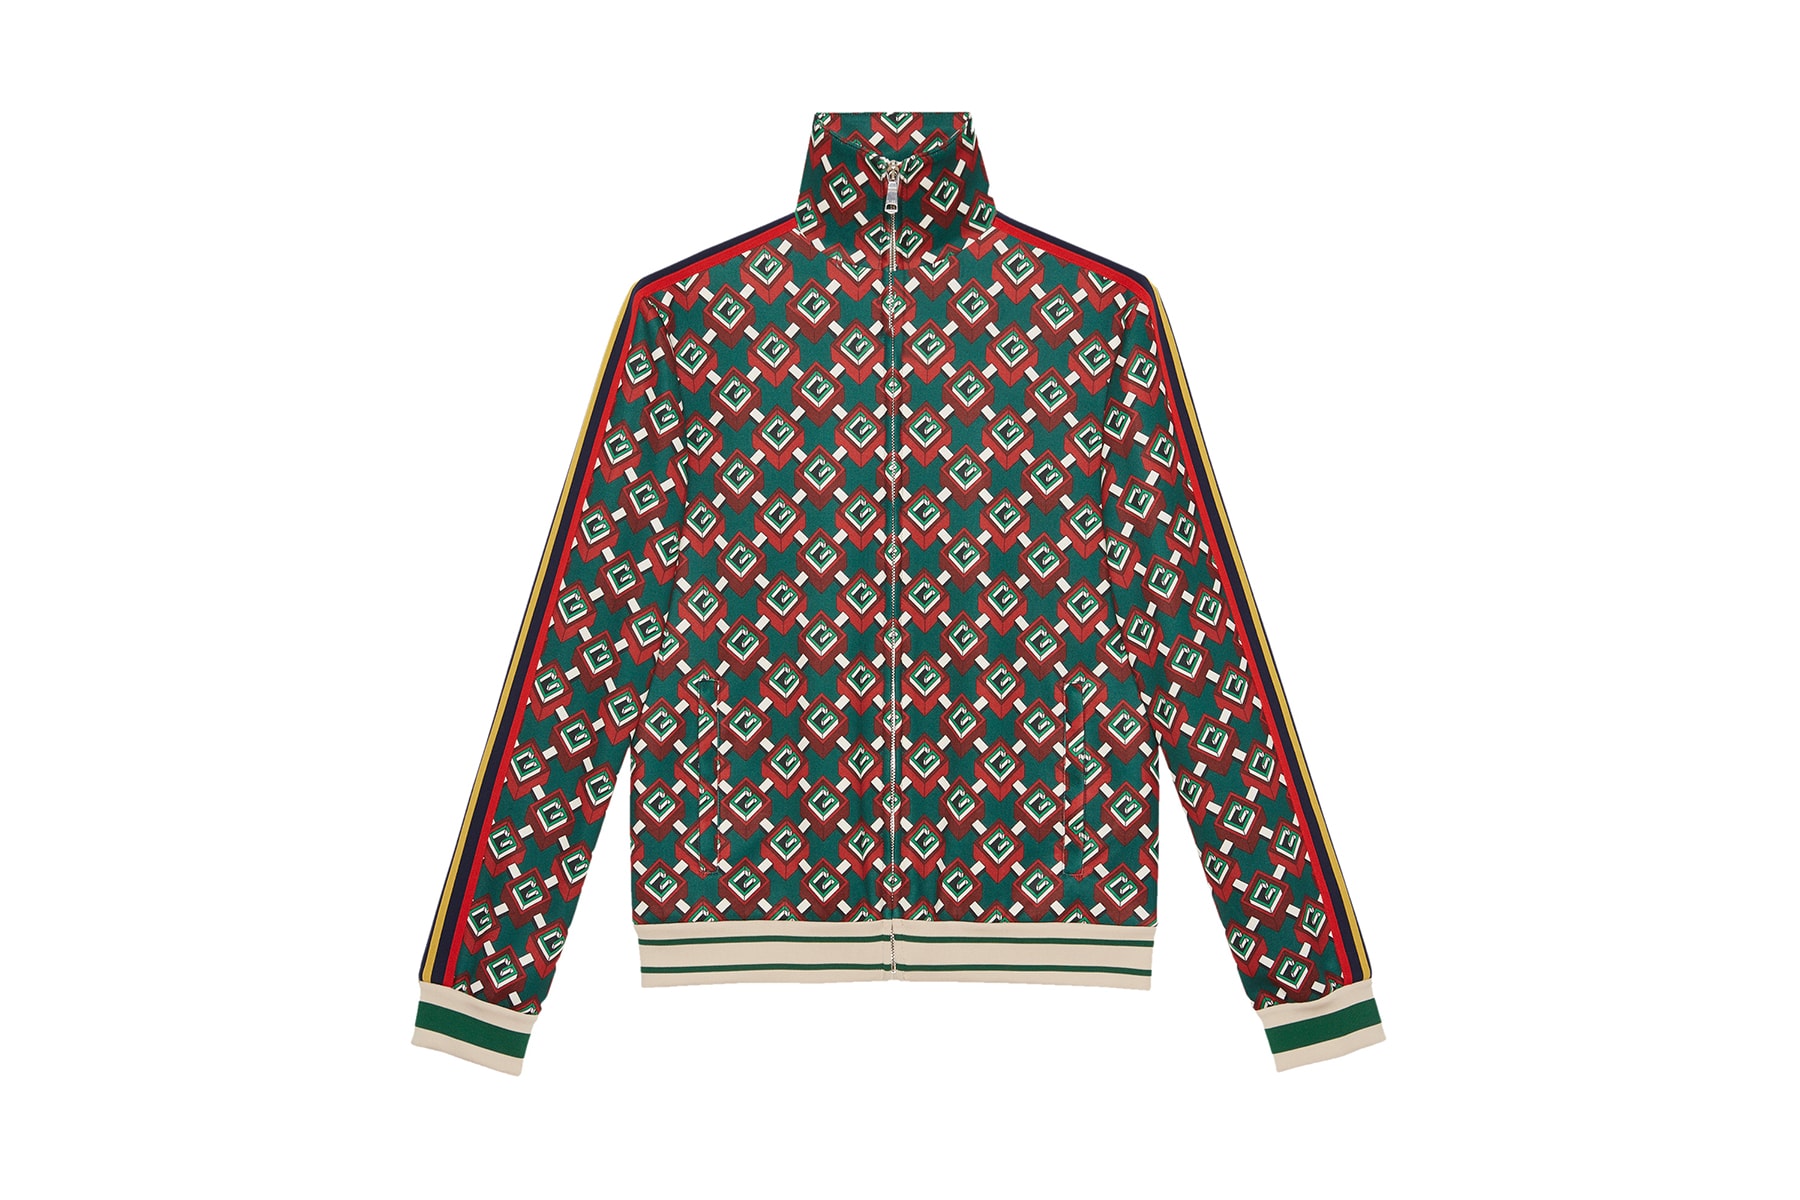 gucci alessandro michele special pre-fall 2018 collection exclusive dover street market dsm new york london tokyo singapore beijing